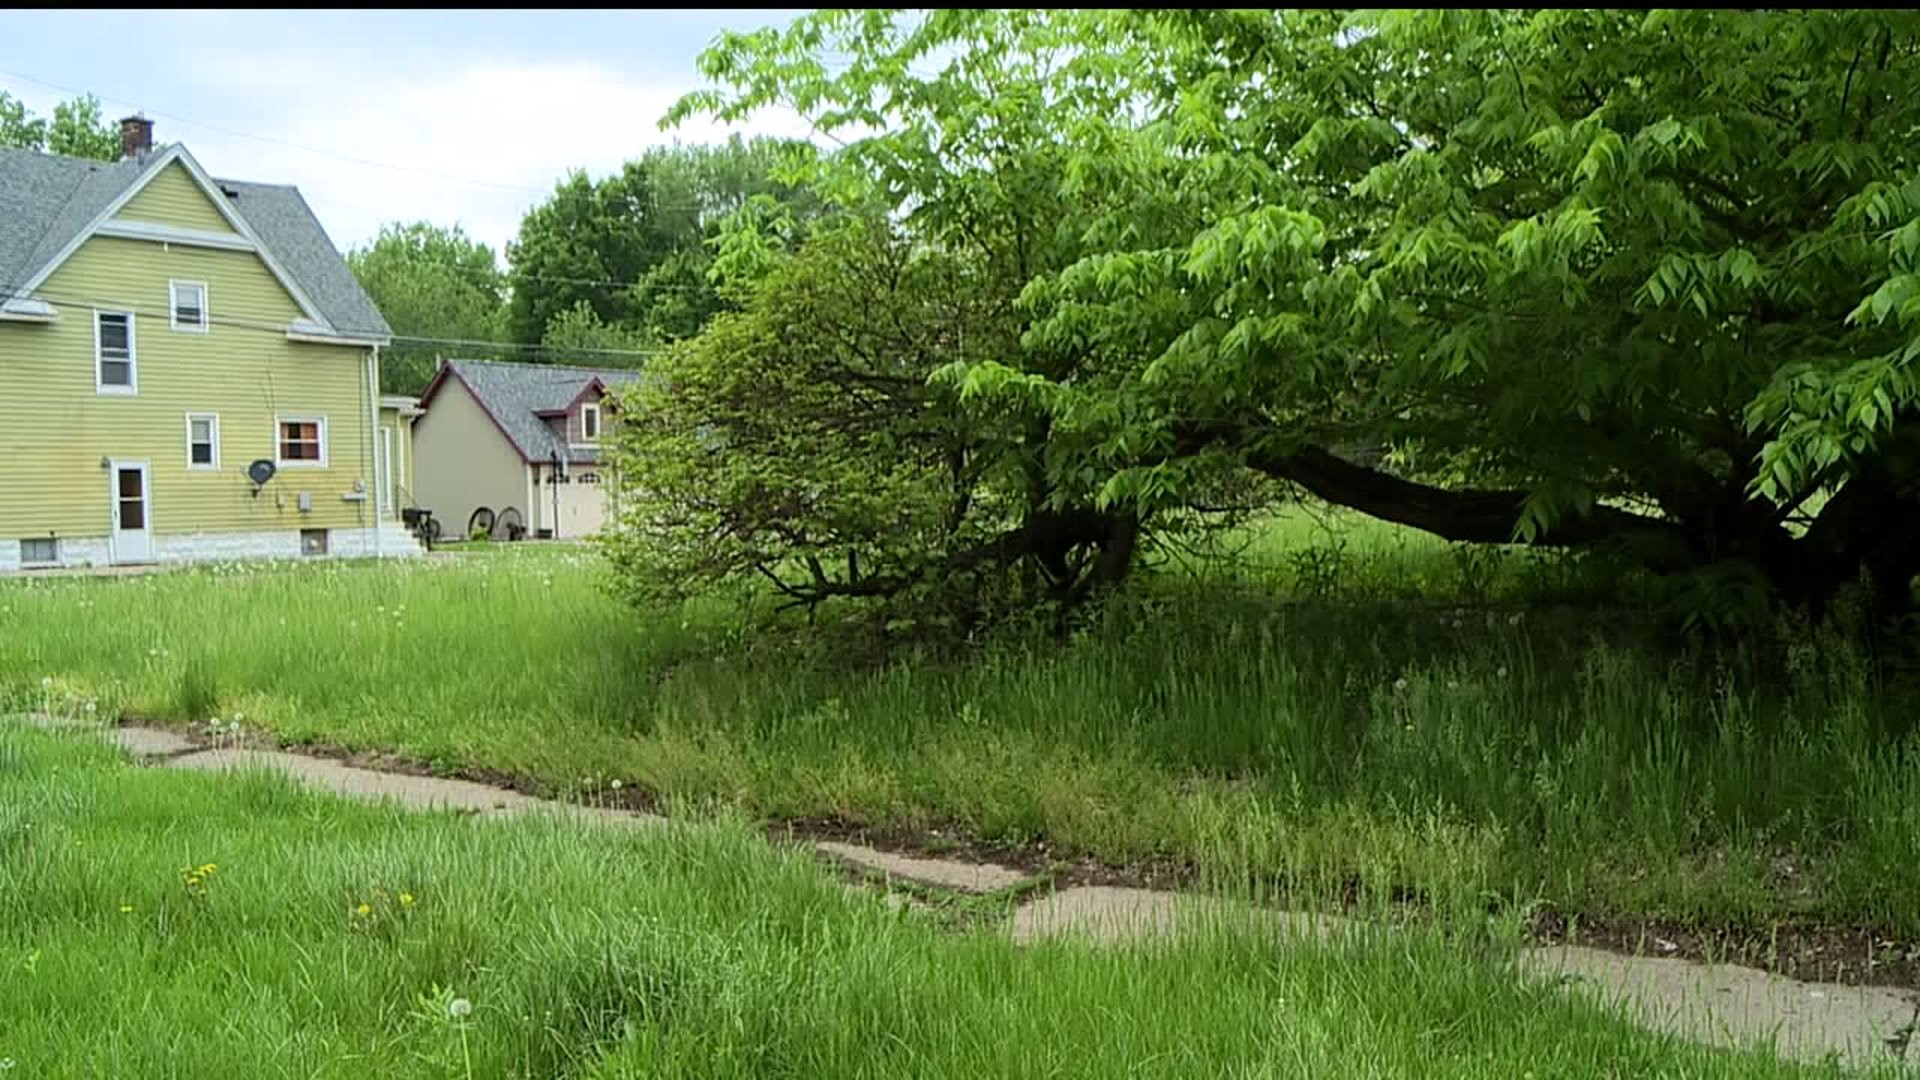 Rock Island city leaders want to sell home lots for five dollars